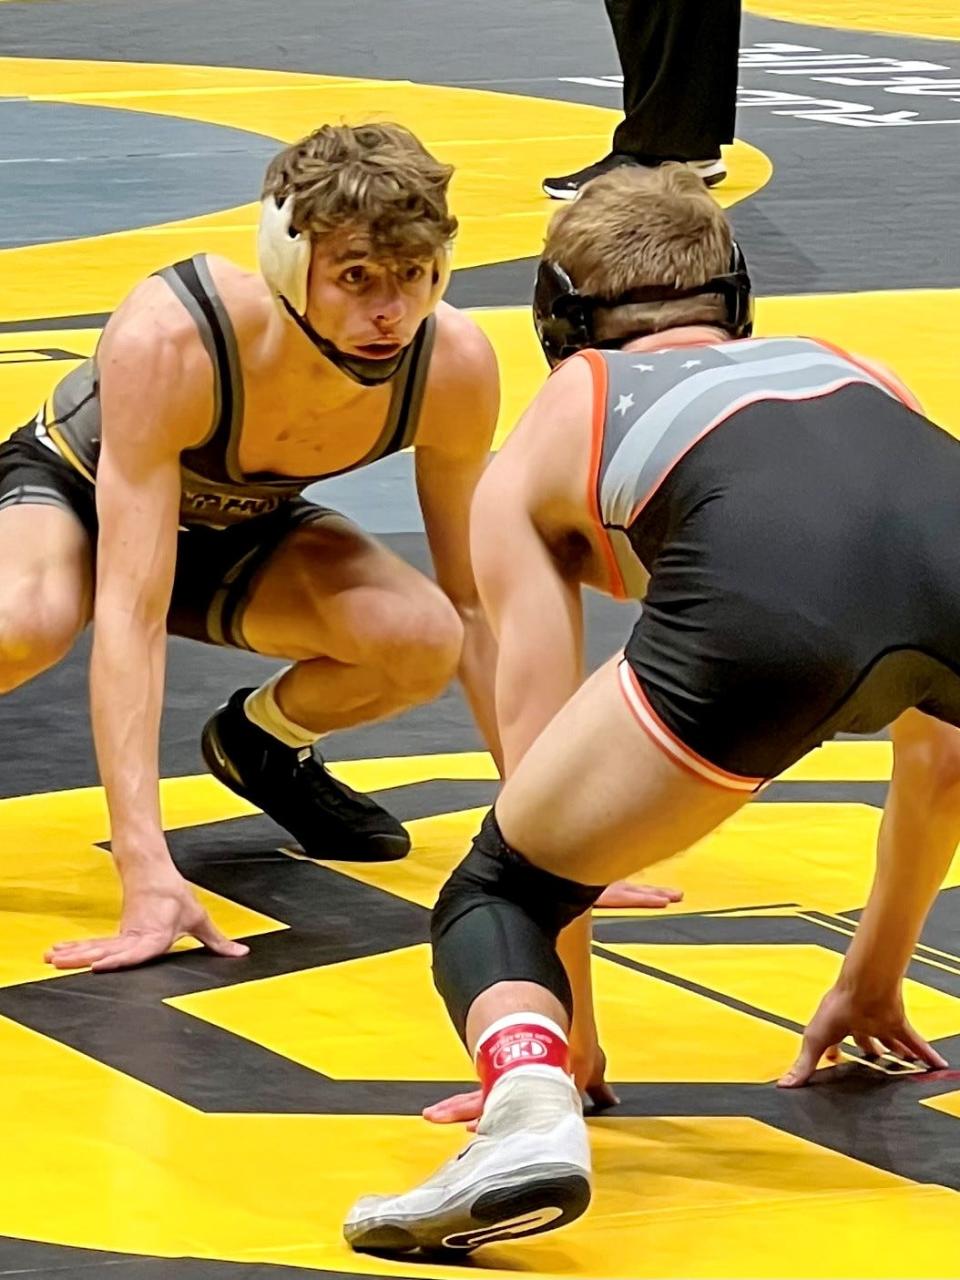 Northmor's Cowin Becker has made the Division III semifinals of 132 pounds at the state wrestling tournament at Ohio State's Schottenstein Center.